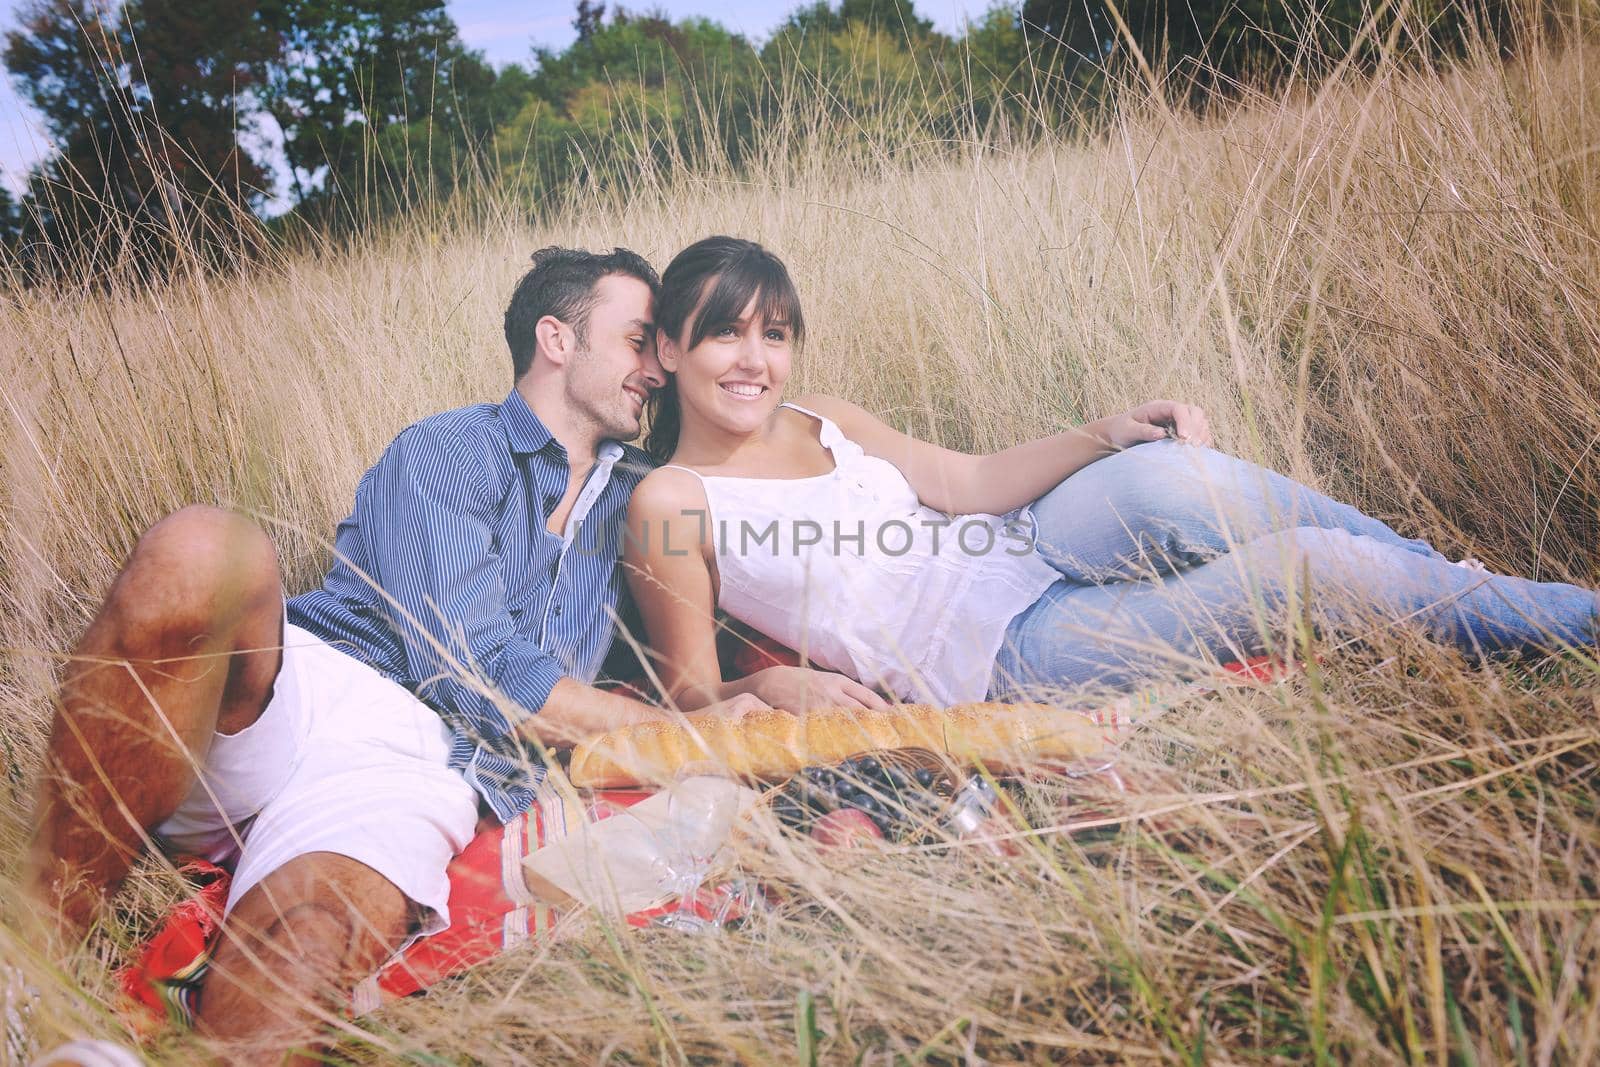 happy couple enjoying countryside picnic in long grass by dotshock